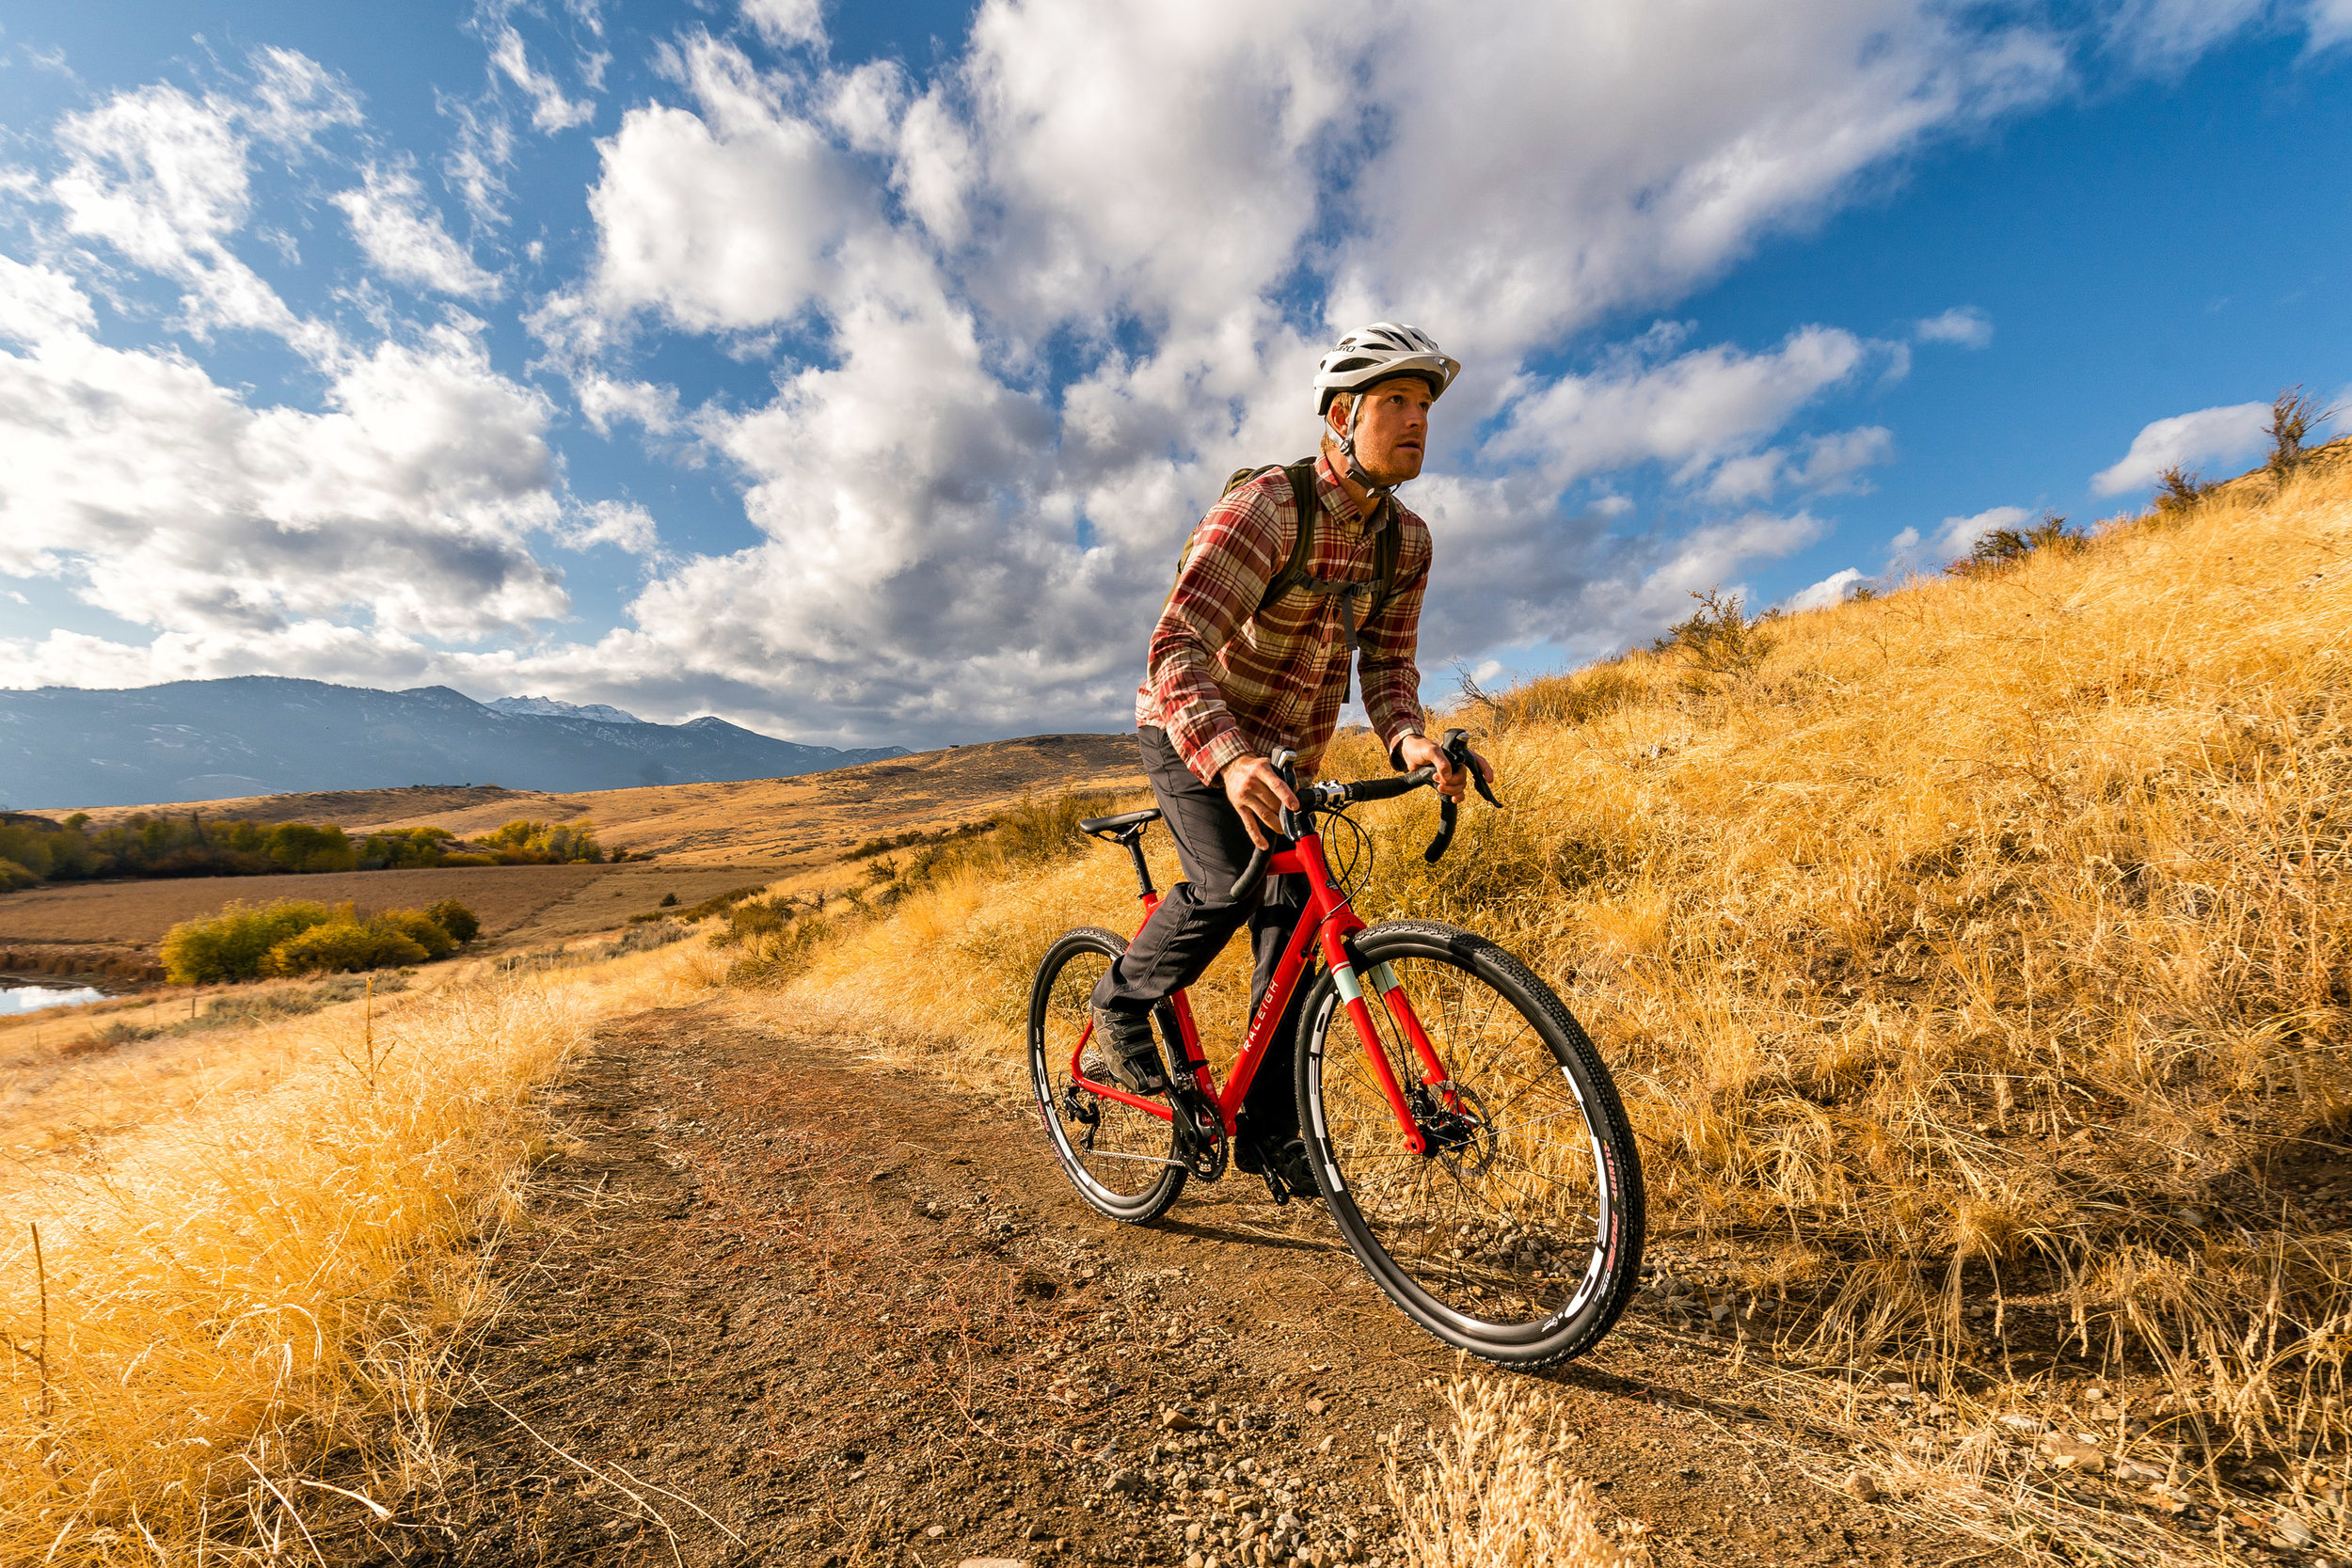  Adventure: Bike riding in the Methow Valley in the fall, Winthrop, Washington 